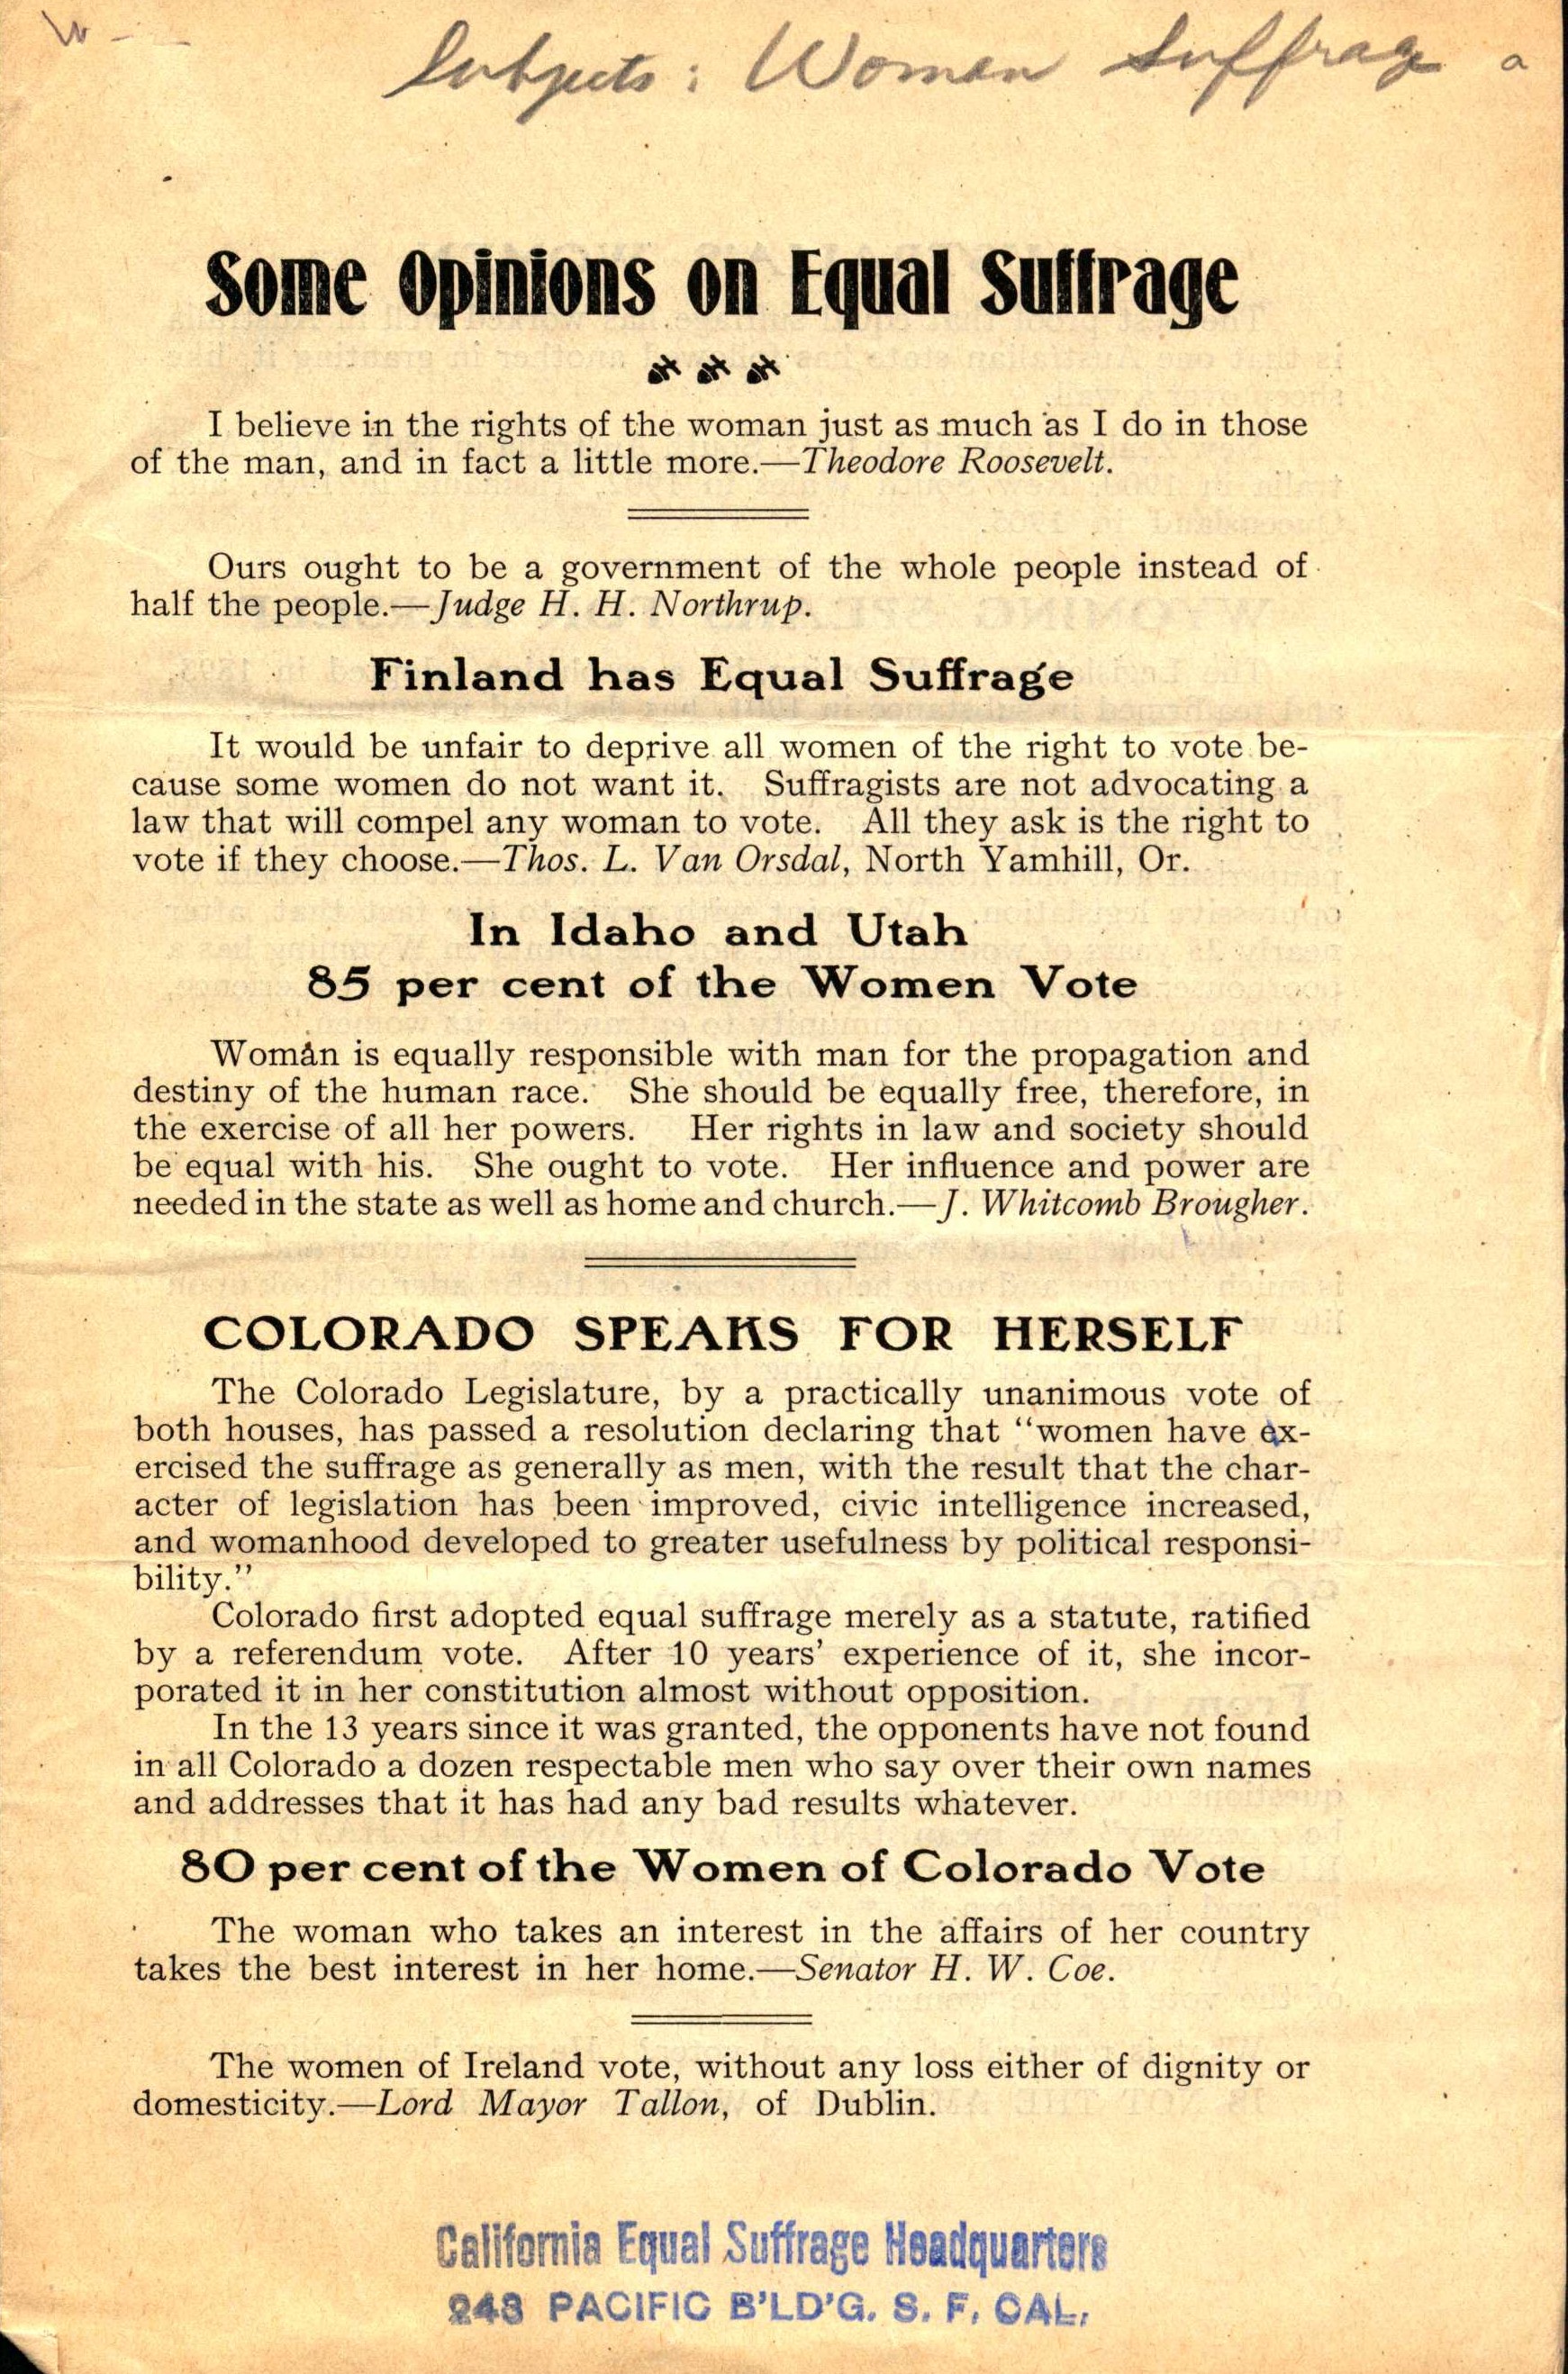 Shows title and start of text including information about suffrage in Finland, Idaho, Utah and Colorado